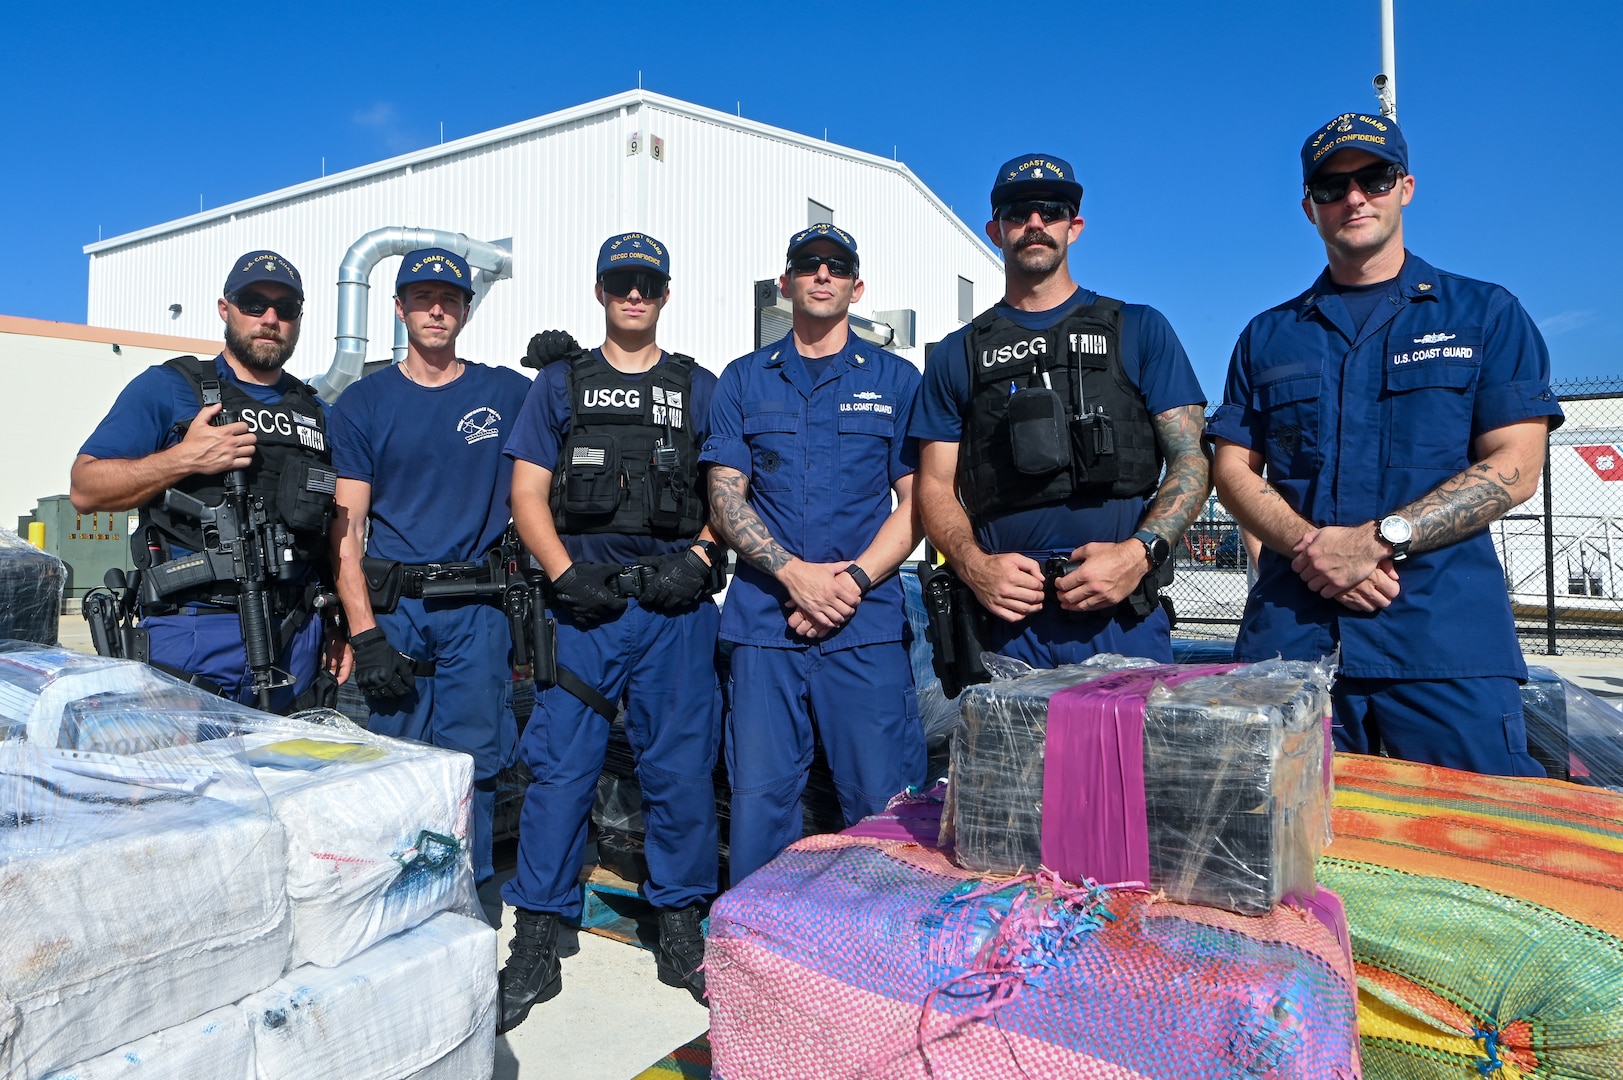 Bales of illegal narcotics, worth an estimated $160 million, are offloaded onto pallets by the U.S. Coast Guard Cutter Confidence (WMEC 619) crew, Sept. 19, 2023, at Coast Guard Base Miami Beach, Florida. Coast Guard and partner agency crews interdicted the illegal narcotics during nine separate cases in the international waters of the Caribbean Sea. (U.S. Coast Guard photo by Petty Officer 3rd Class Santiago Gomez)